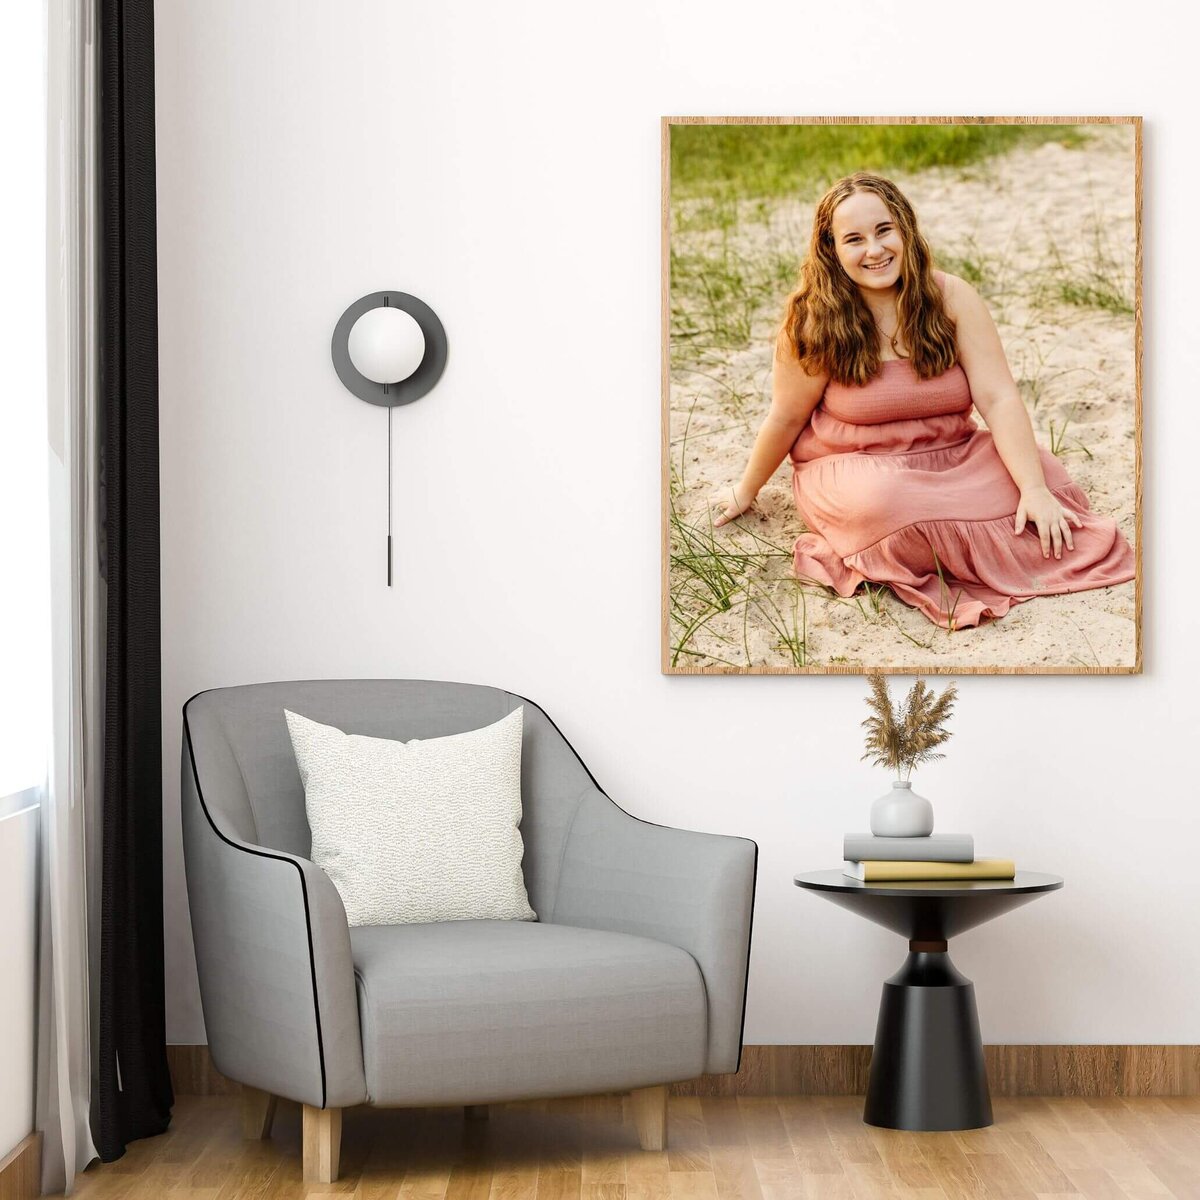 framed image of a senior in a pink dress sitting on a beach hanging on a white wall next to a grey chair.